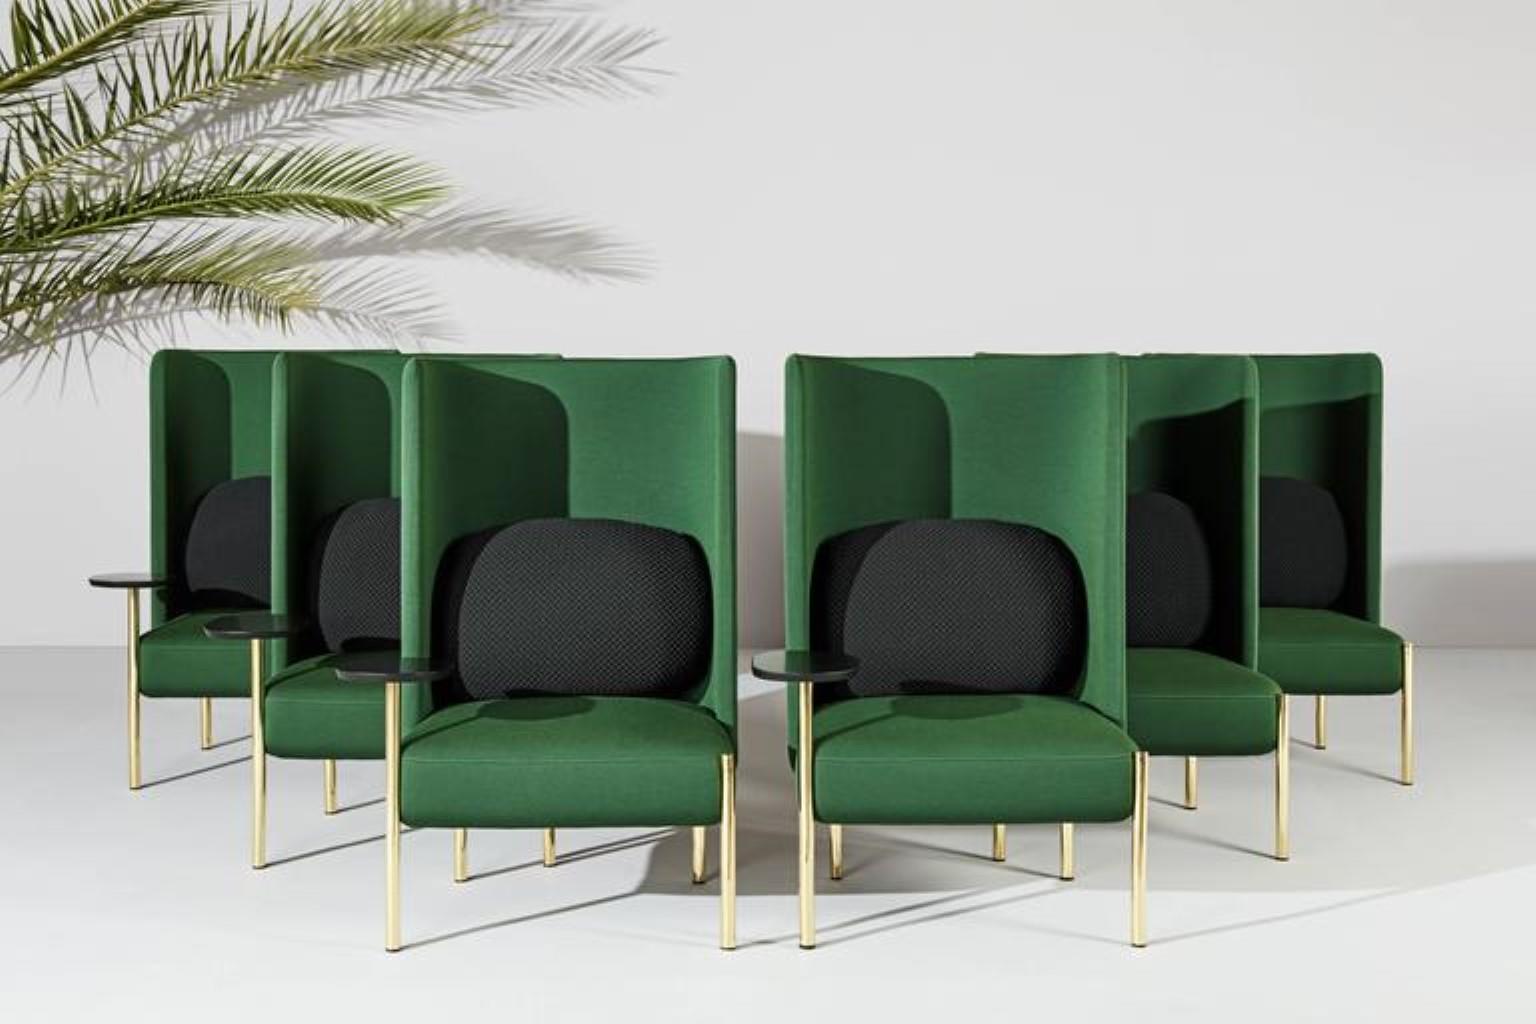 Set of 2 Ara green armchairs by Pepe Albargues
Dimensions: 125 x 74 x 74 cm.
Materials: Iron backrest structure and pine wood seat structure. Seat stuffed with polyurethane 3542 covered with polyester fibre. Cushion: 50% goose feathers and 50%